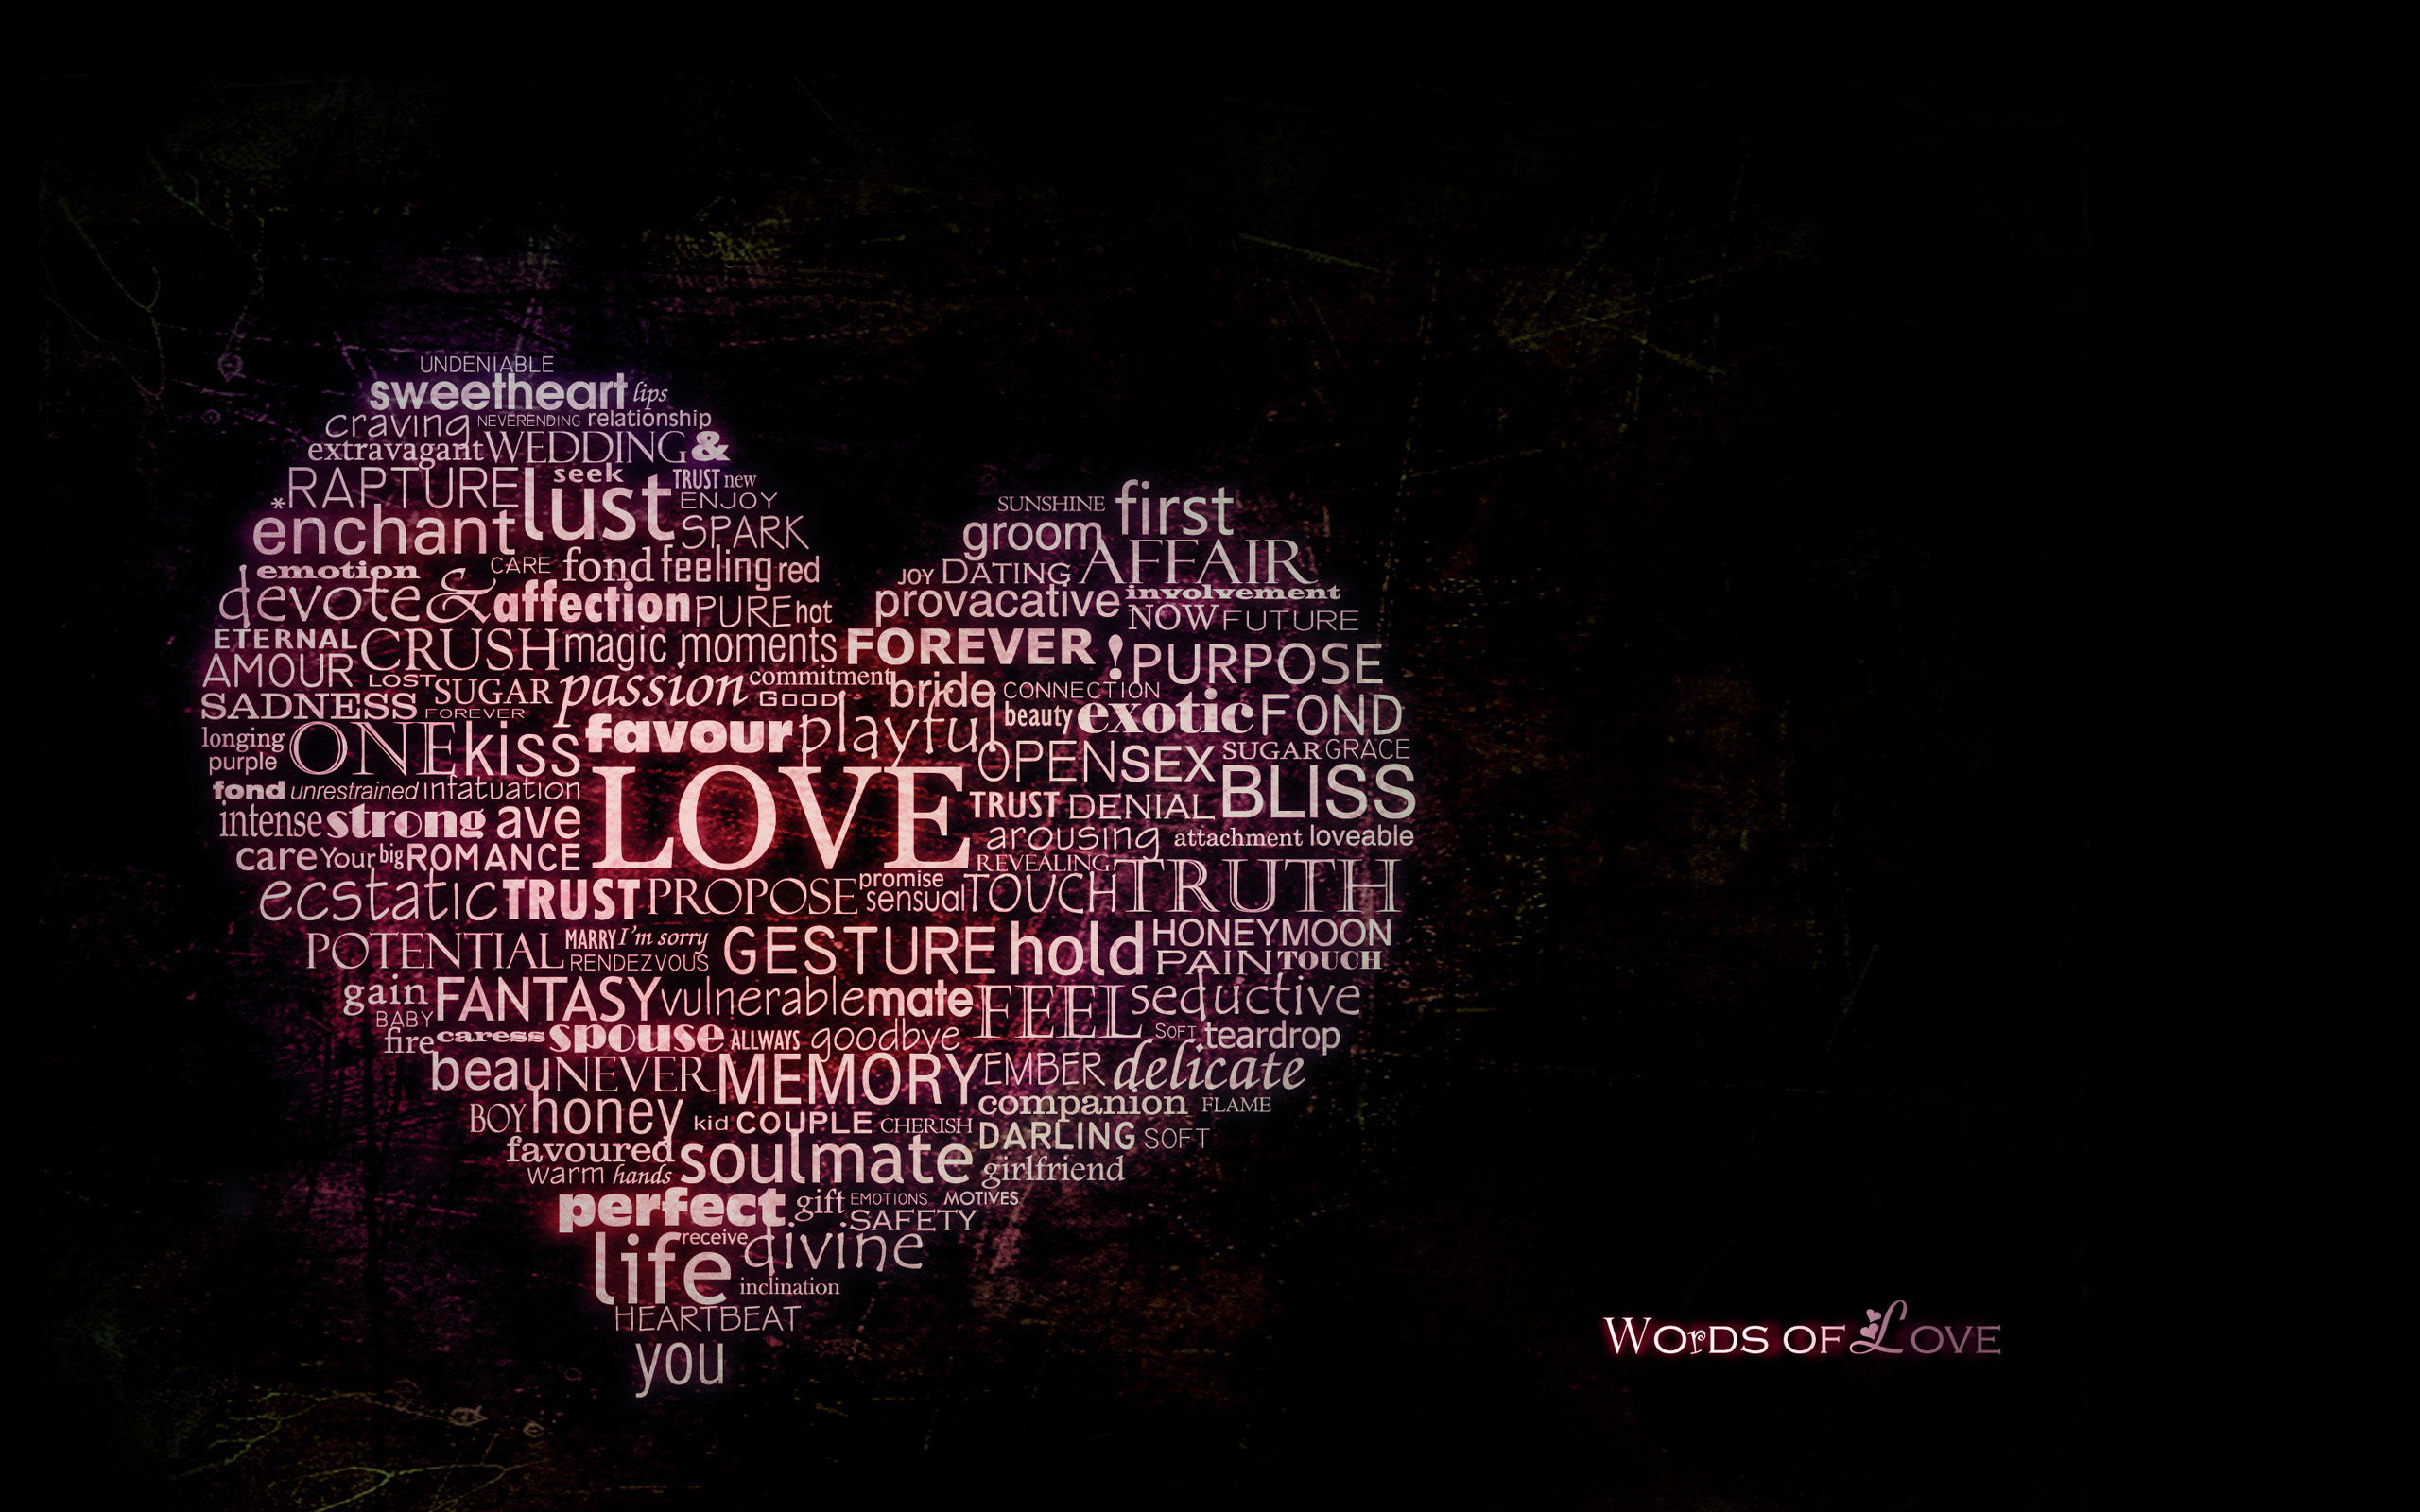 Velentines day wallpaper for the month of love (9)